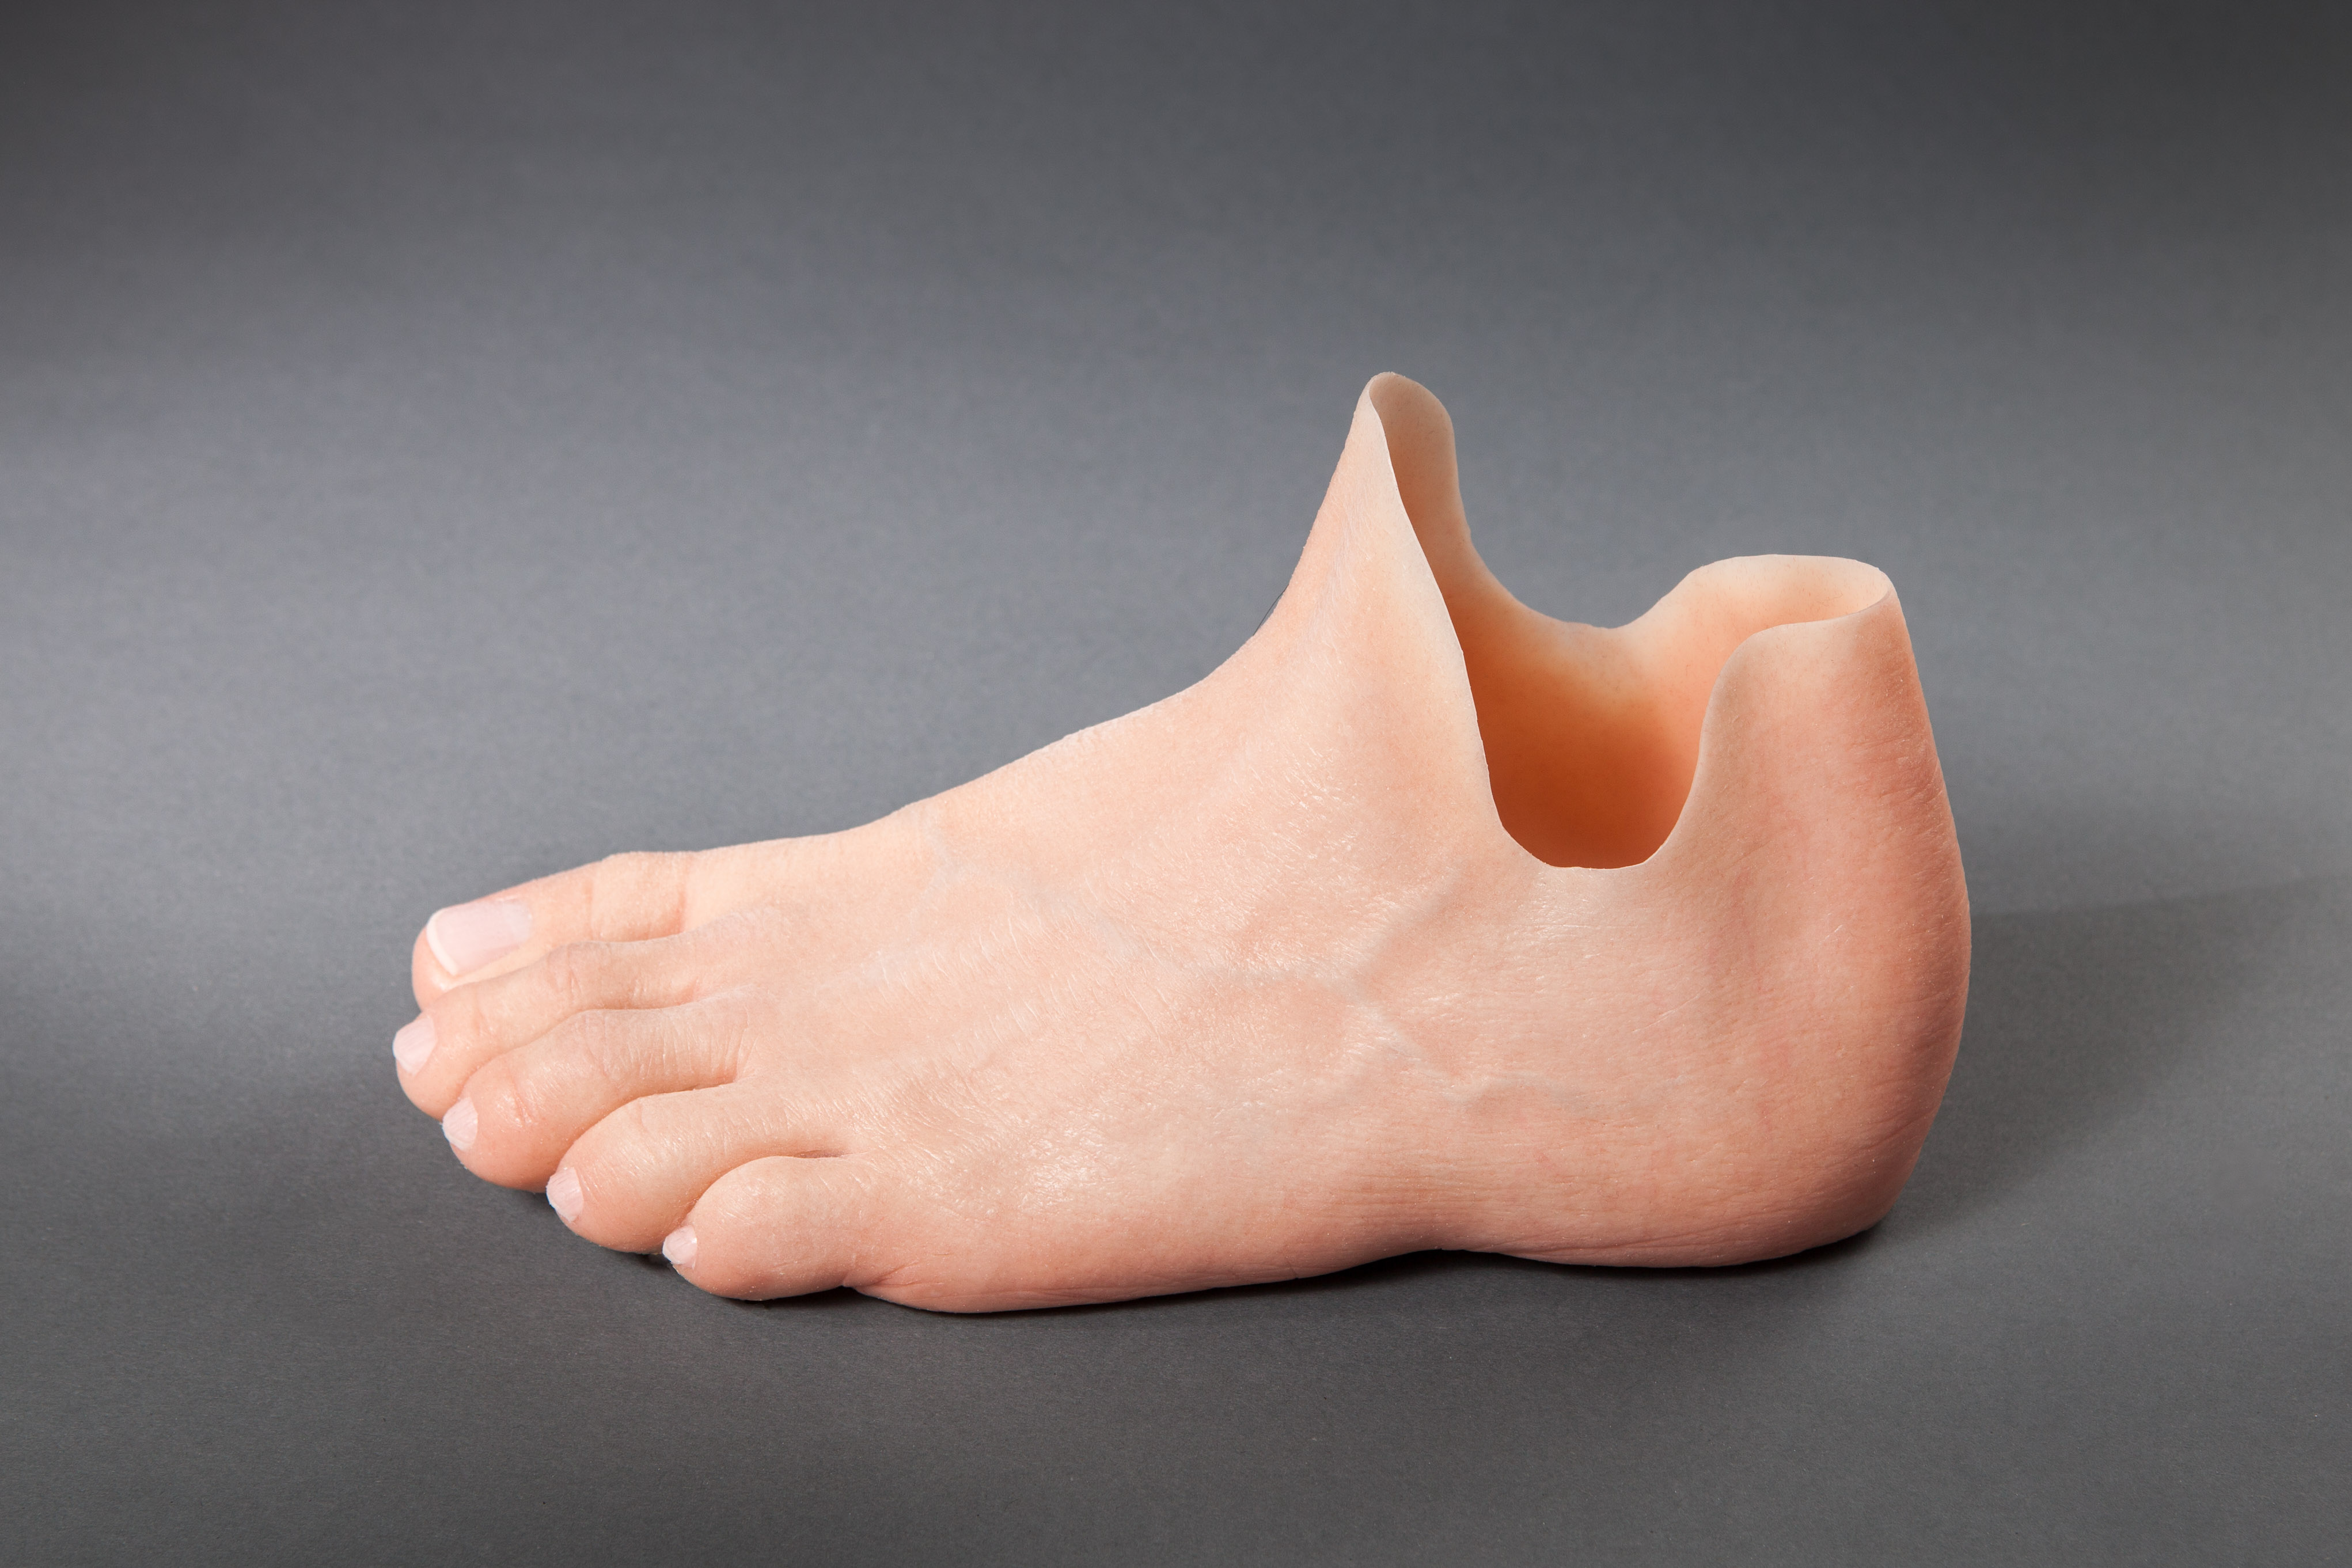 German StartUp teases Silicone prosthesis out of 3D Printers